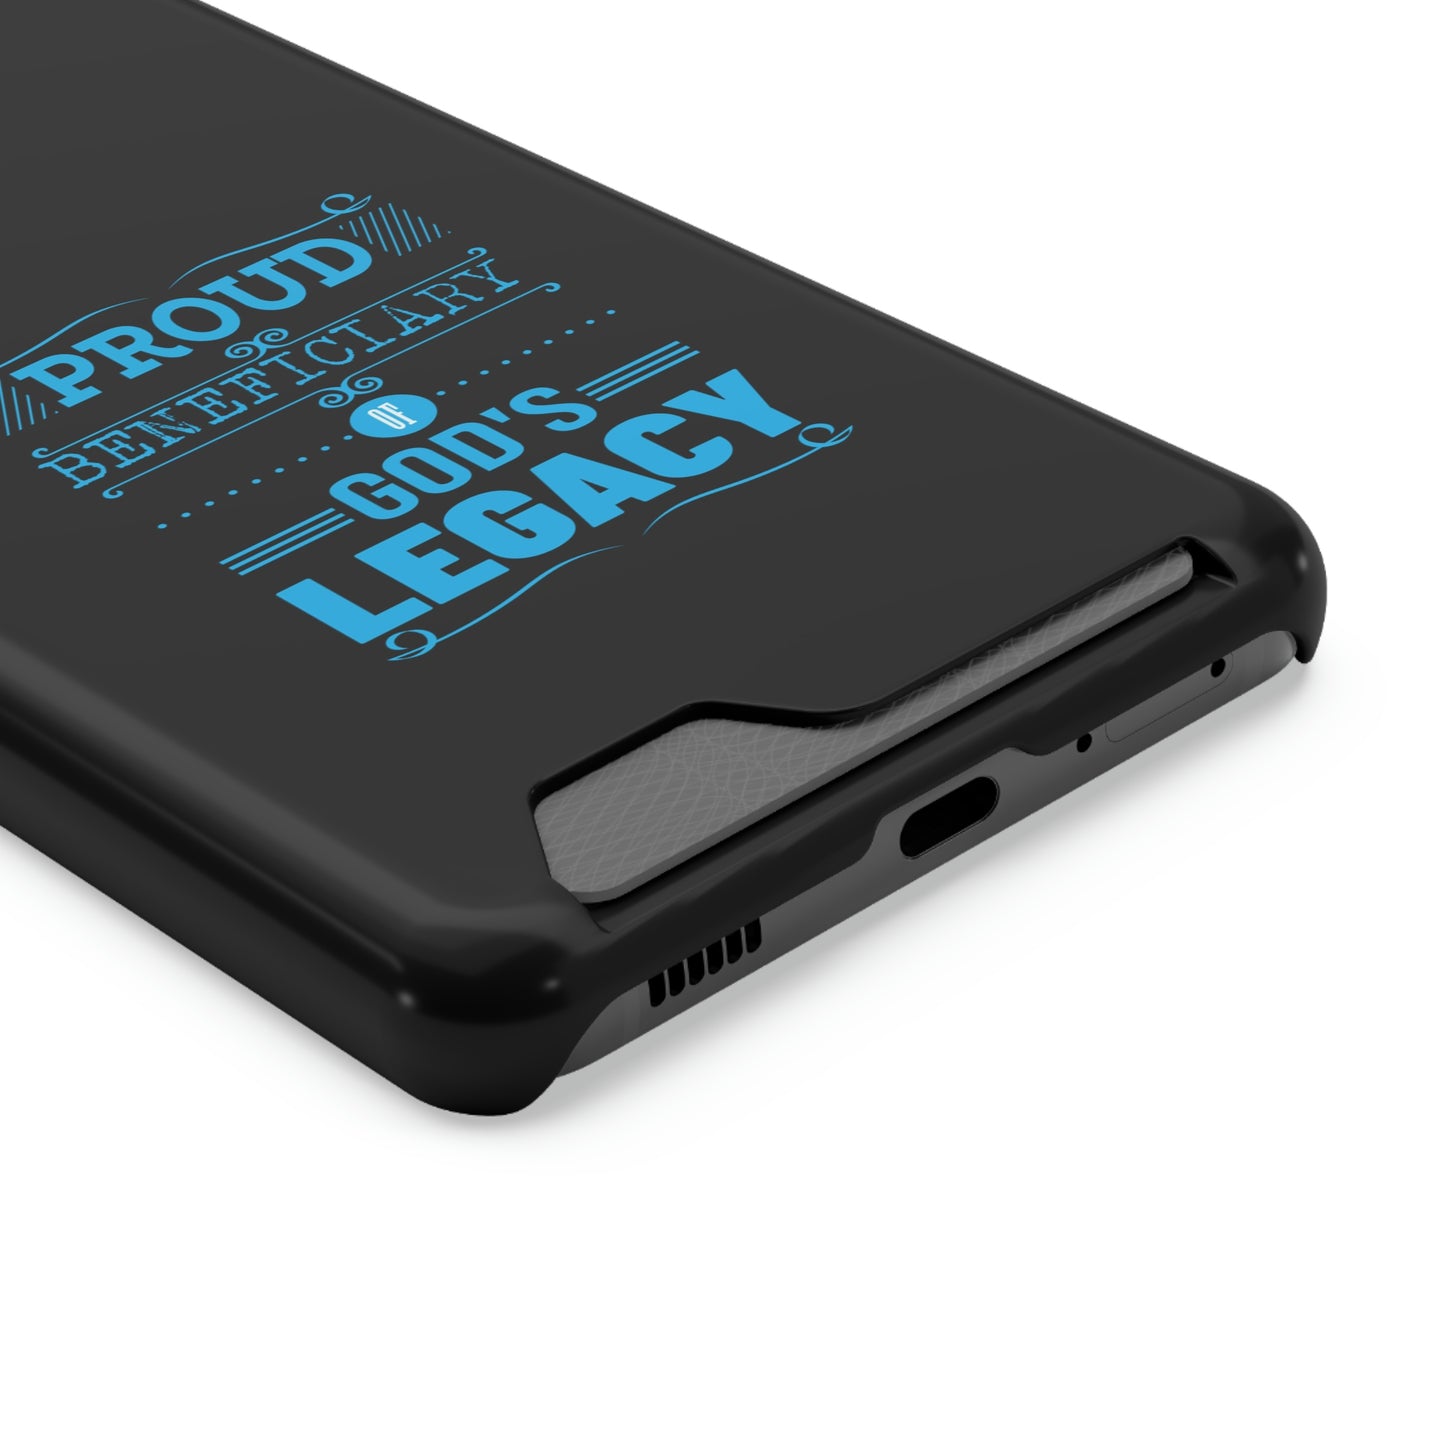 Proud Beneficiary Of God's Legacy Phone Case With Card Holder